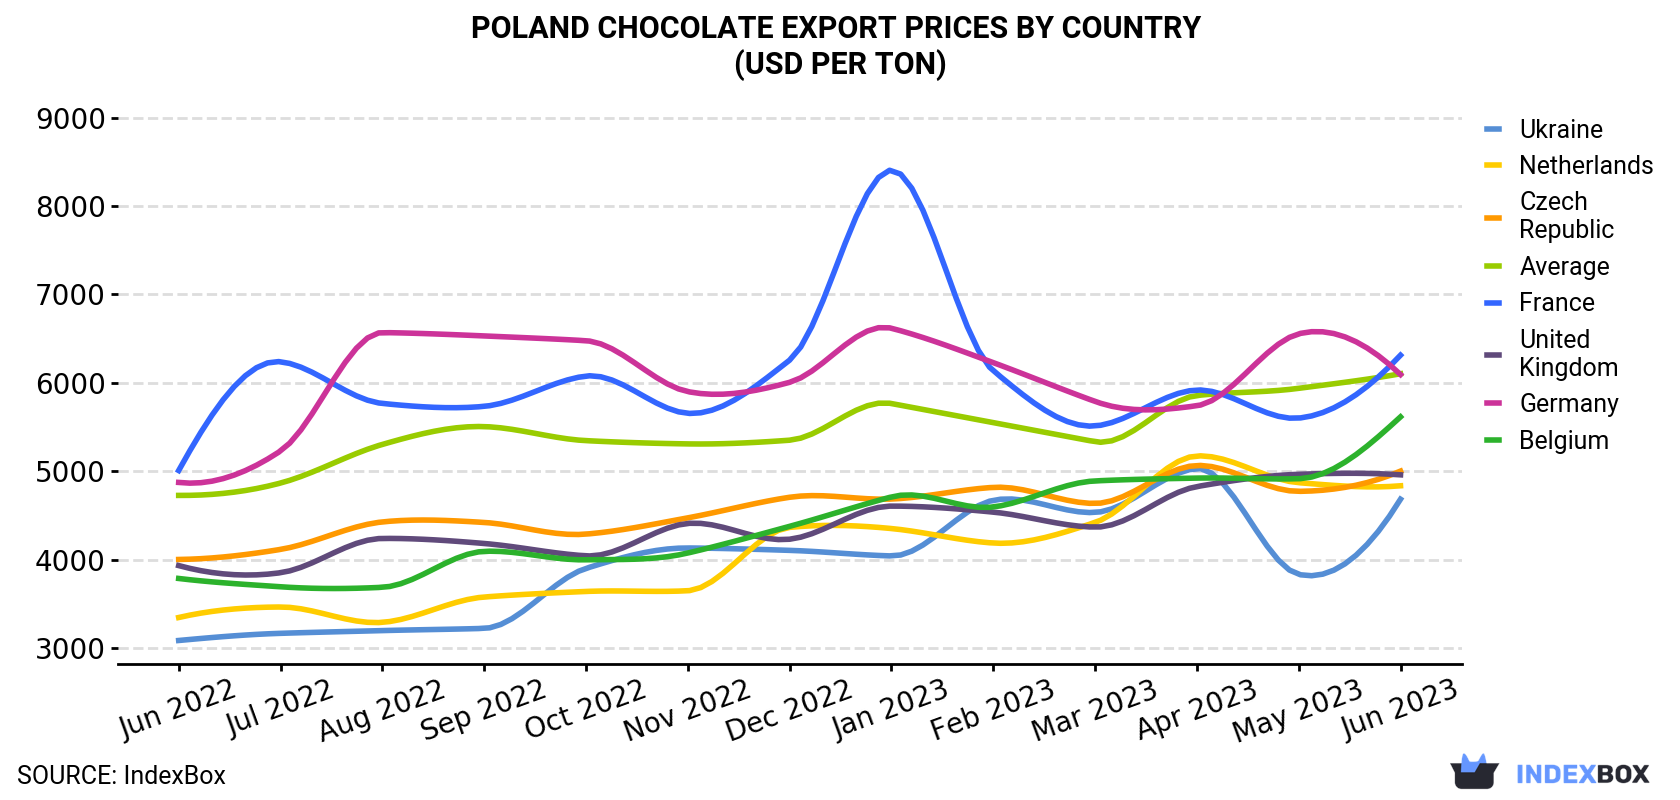 Poland Chocolate Export Prices By Country (USD Per Ton)